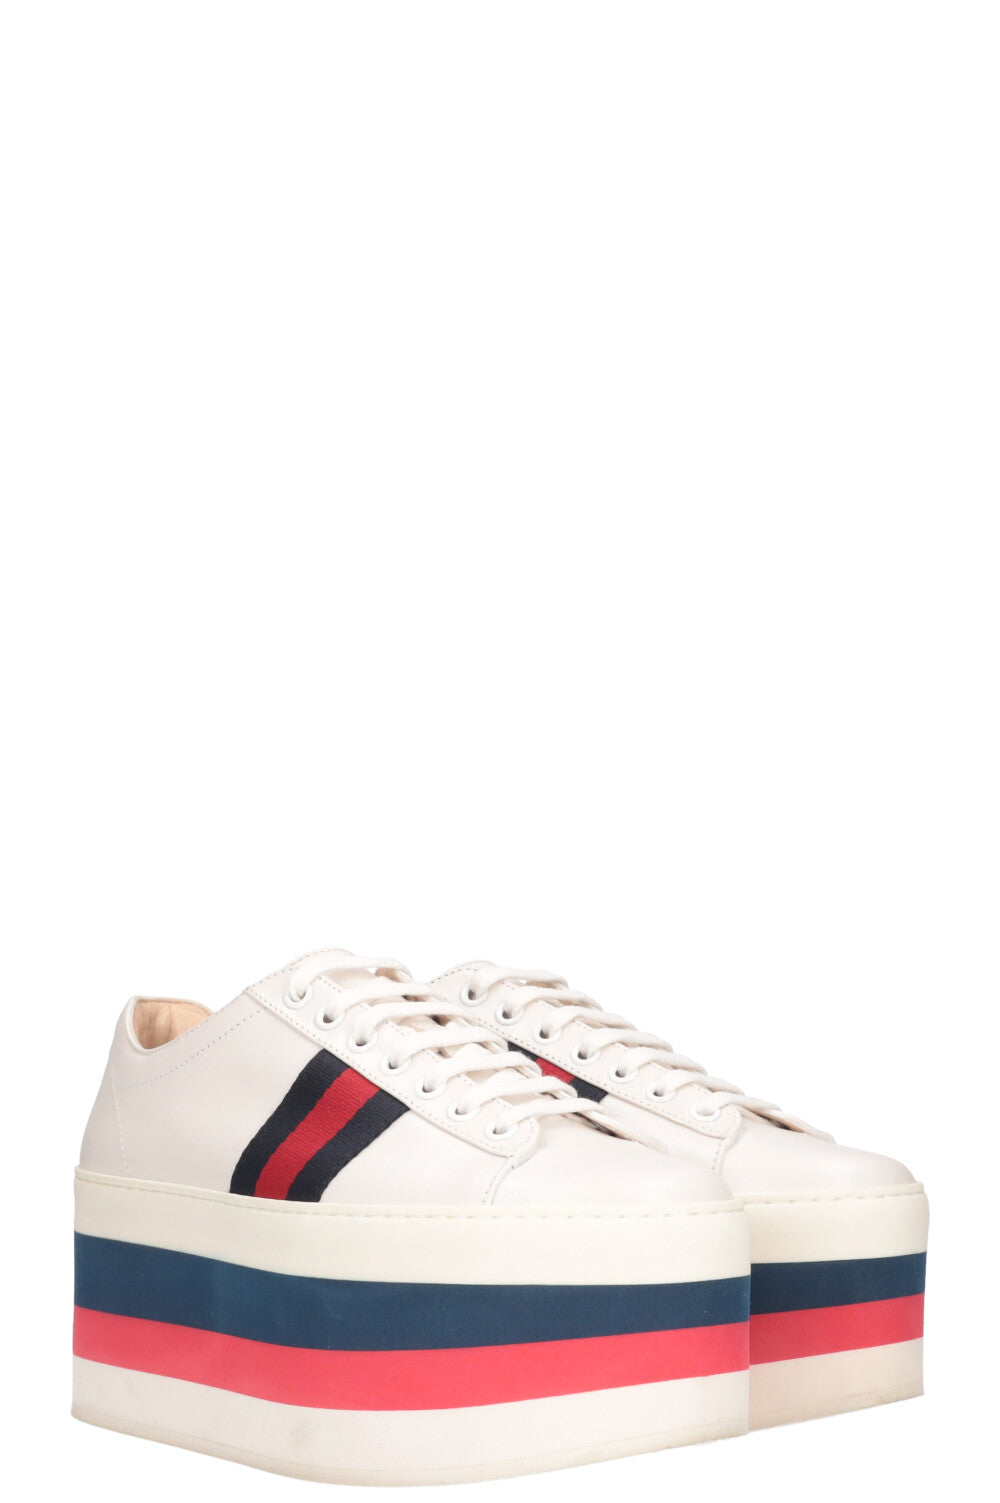 Gucci Platform Sneakers White Red Blue